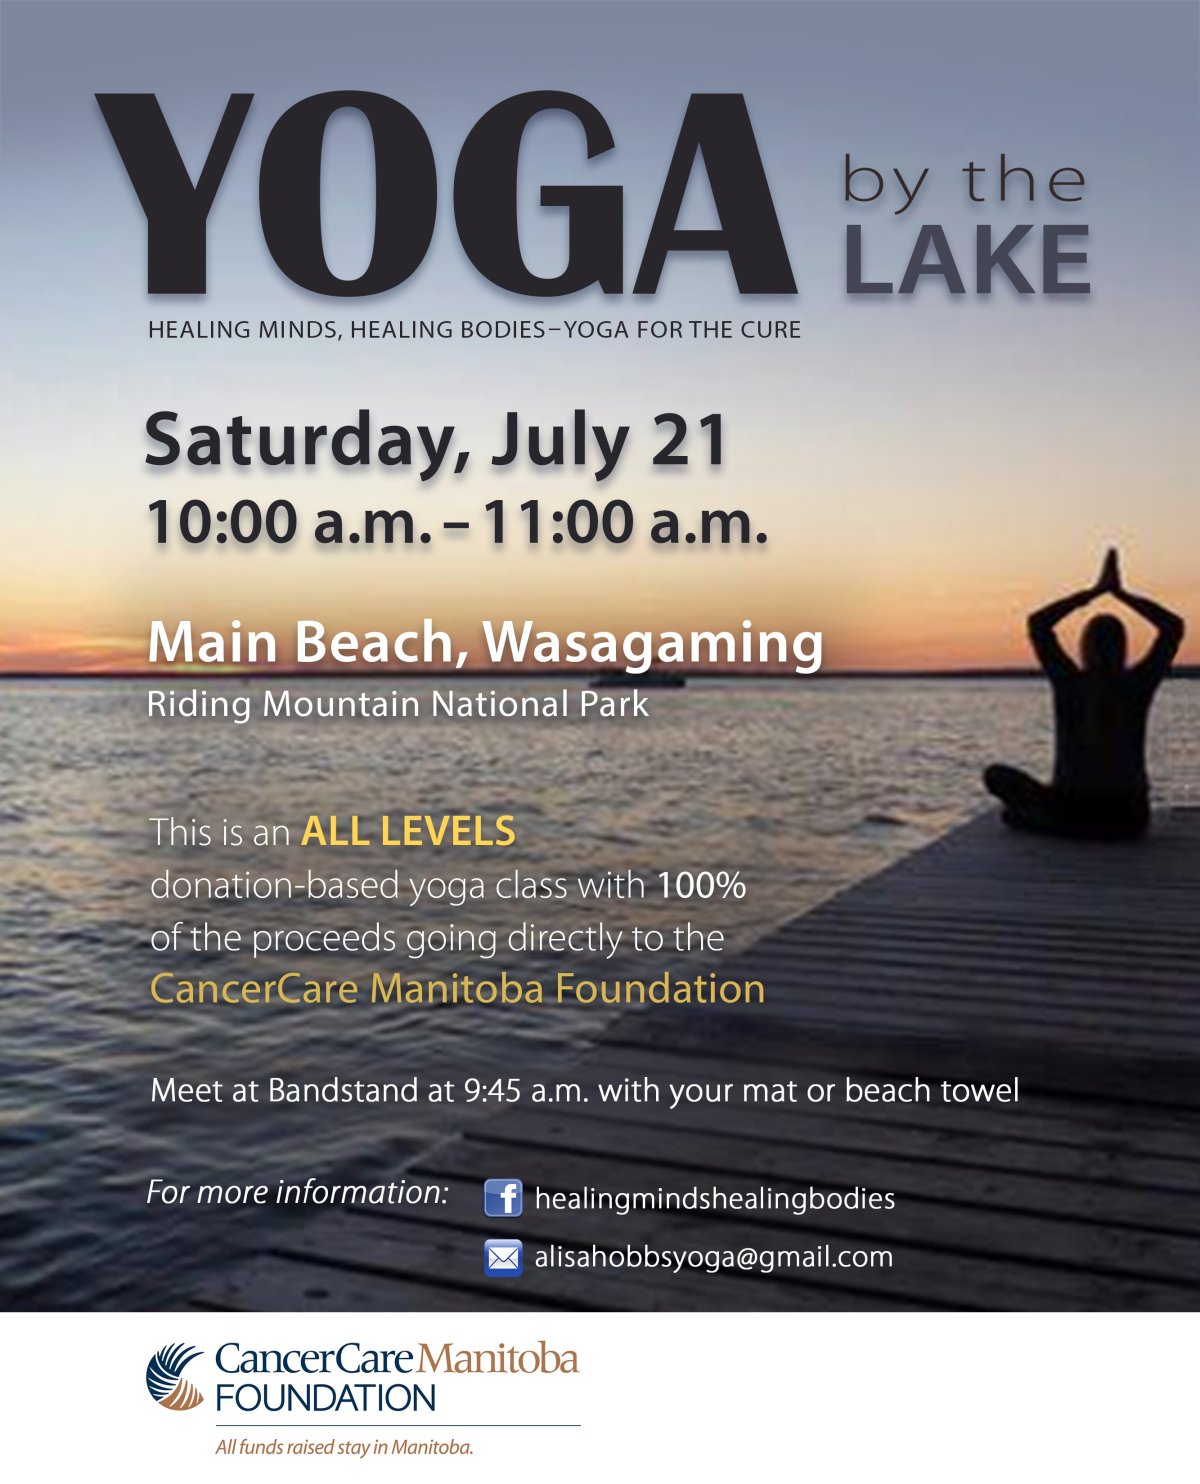 Yoga by the Lake - image